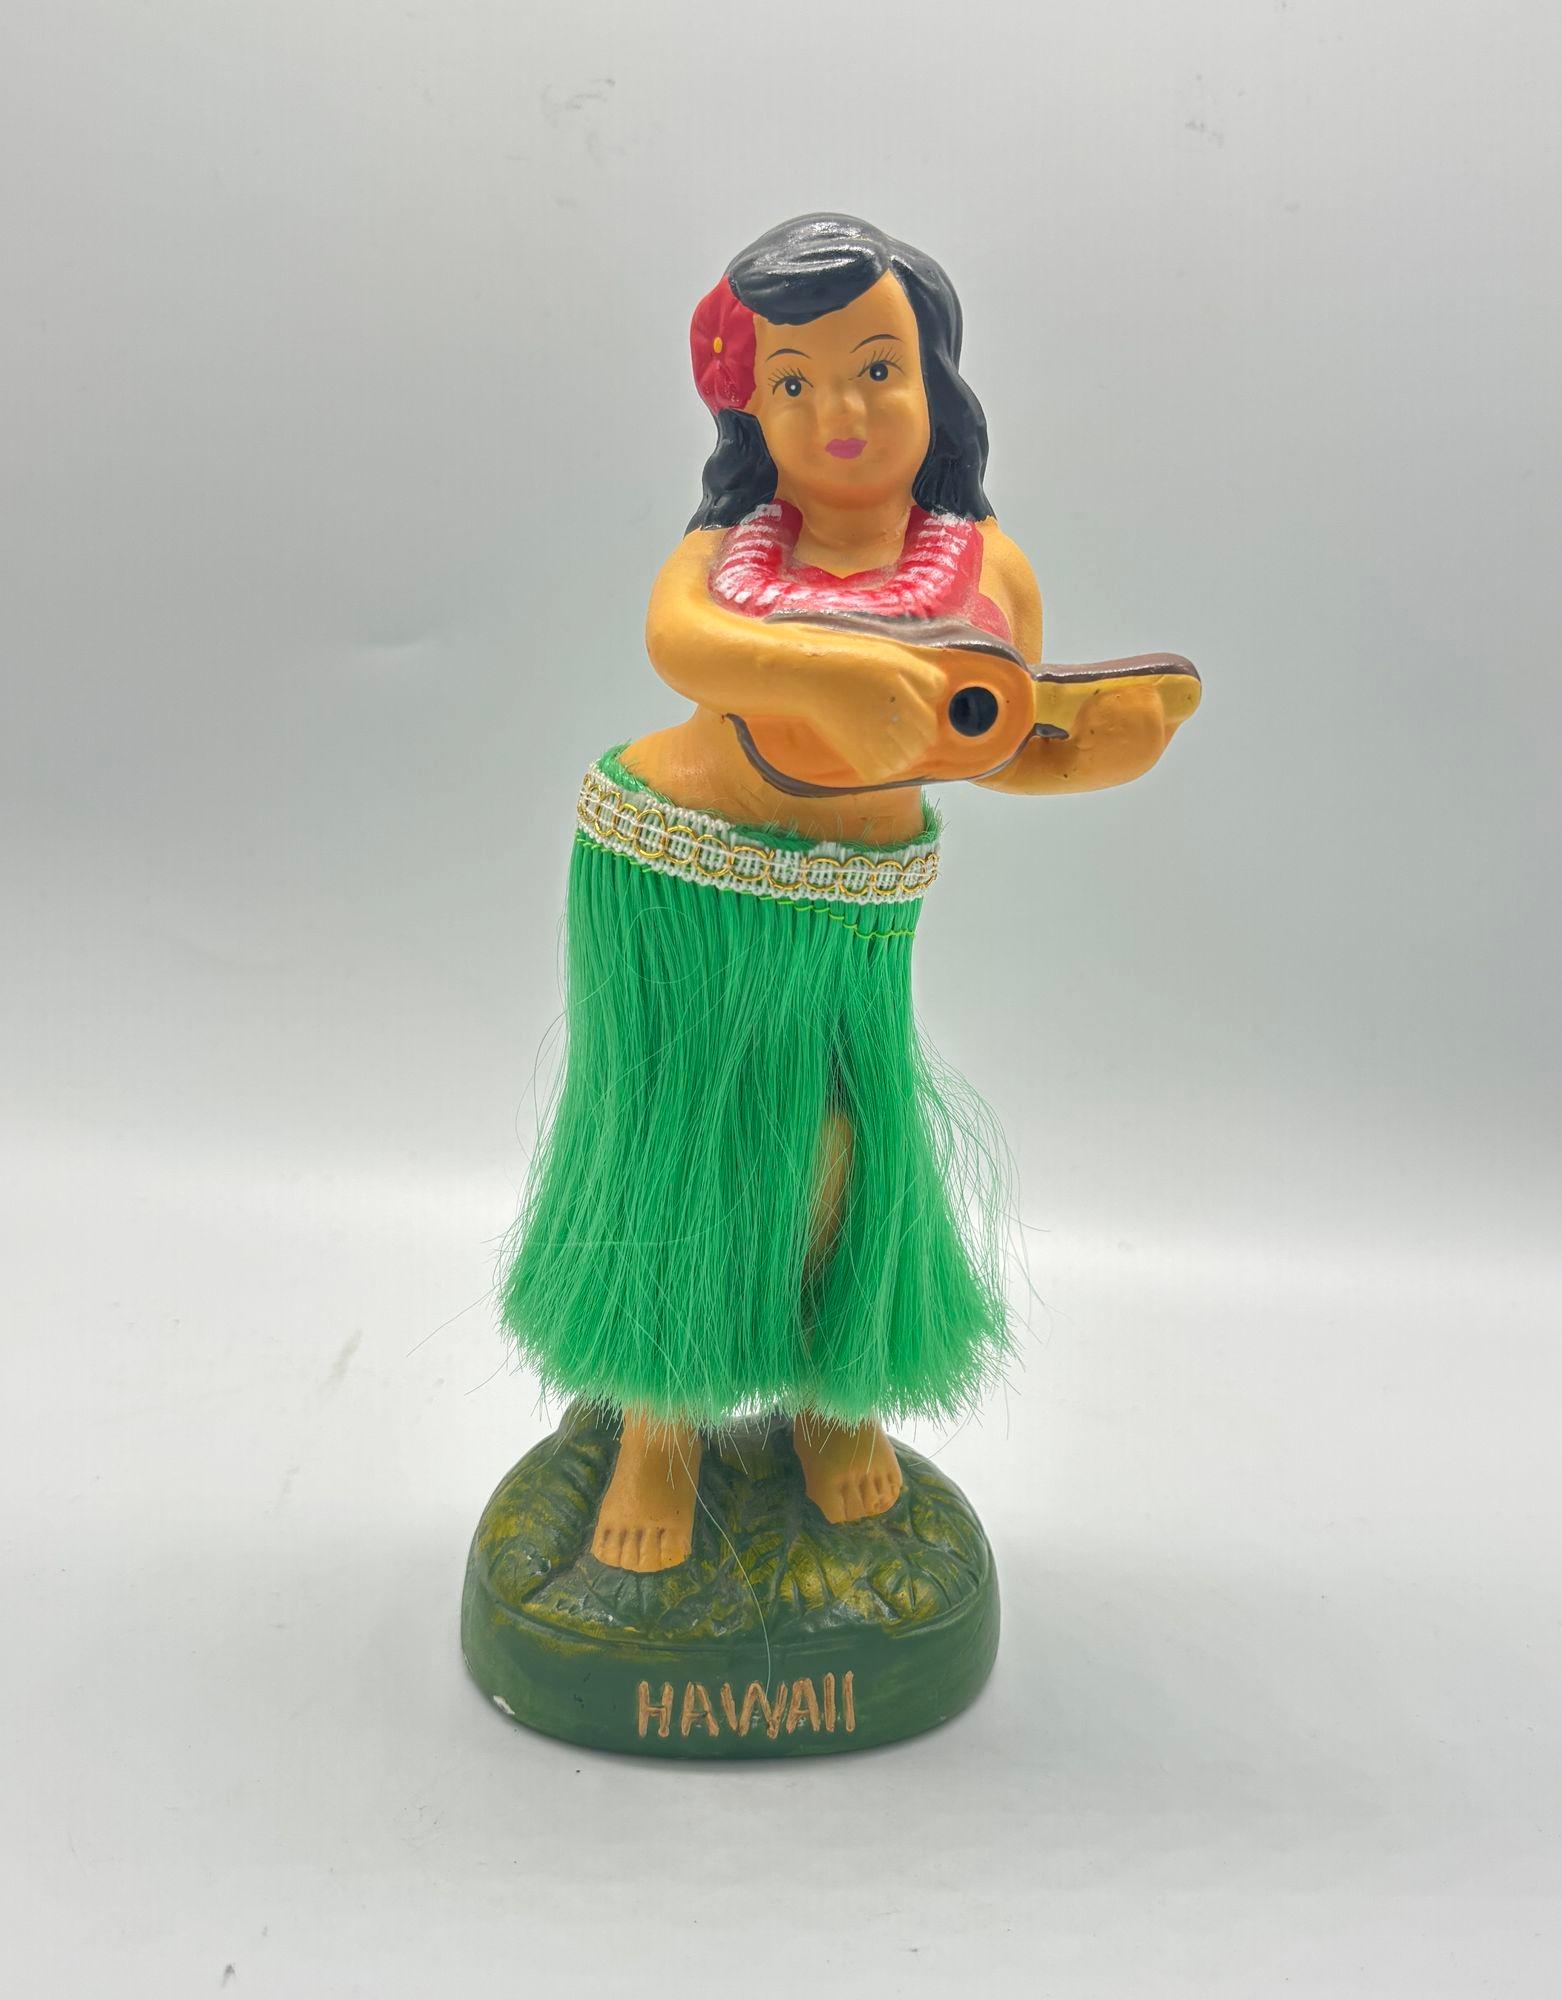 A Ceramic Hawaiian girl nodder figurine depiction of a young girl dressed in traditional Hawaiian attire, includes a colorful floral dress, a flower lei around her neck, and a flower in her hair. She is standing on a base with a spring-loaded